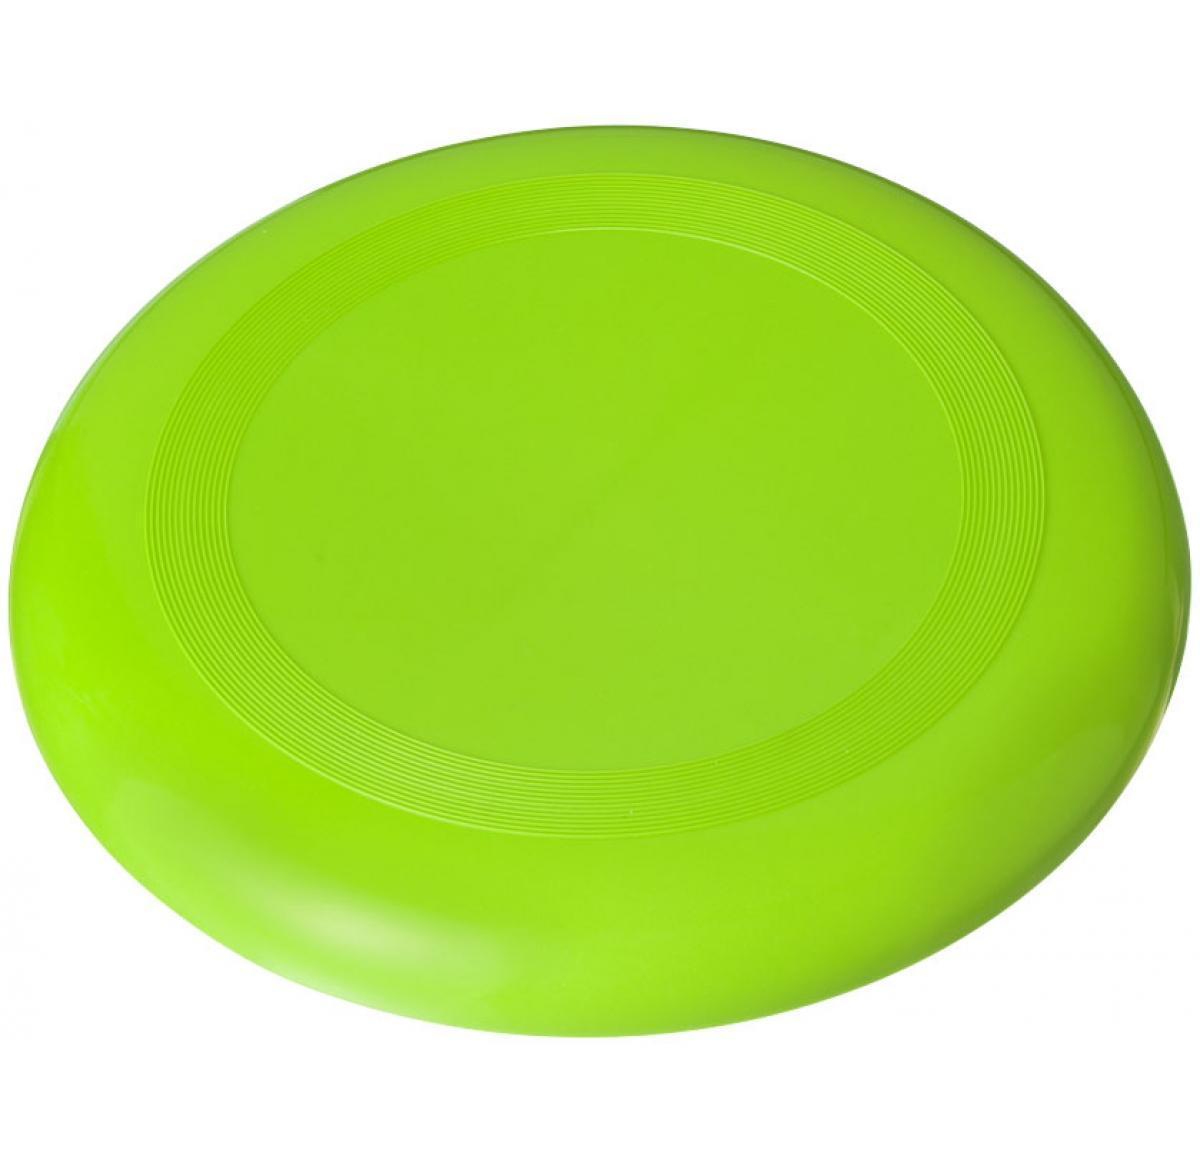 Printed Promotional Frisbee - Buy Promotional Products UK | Branded ...